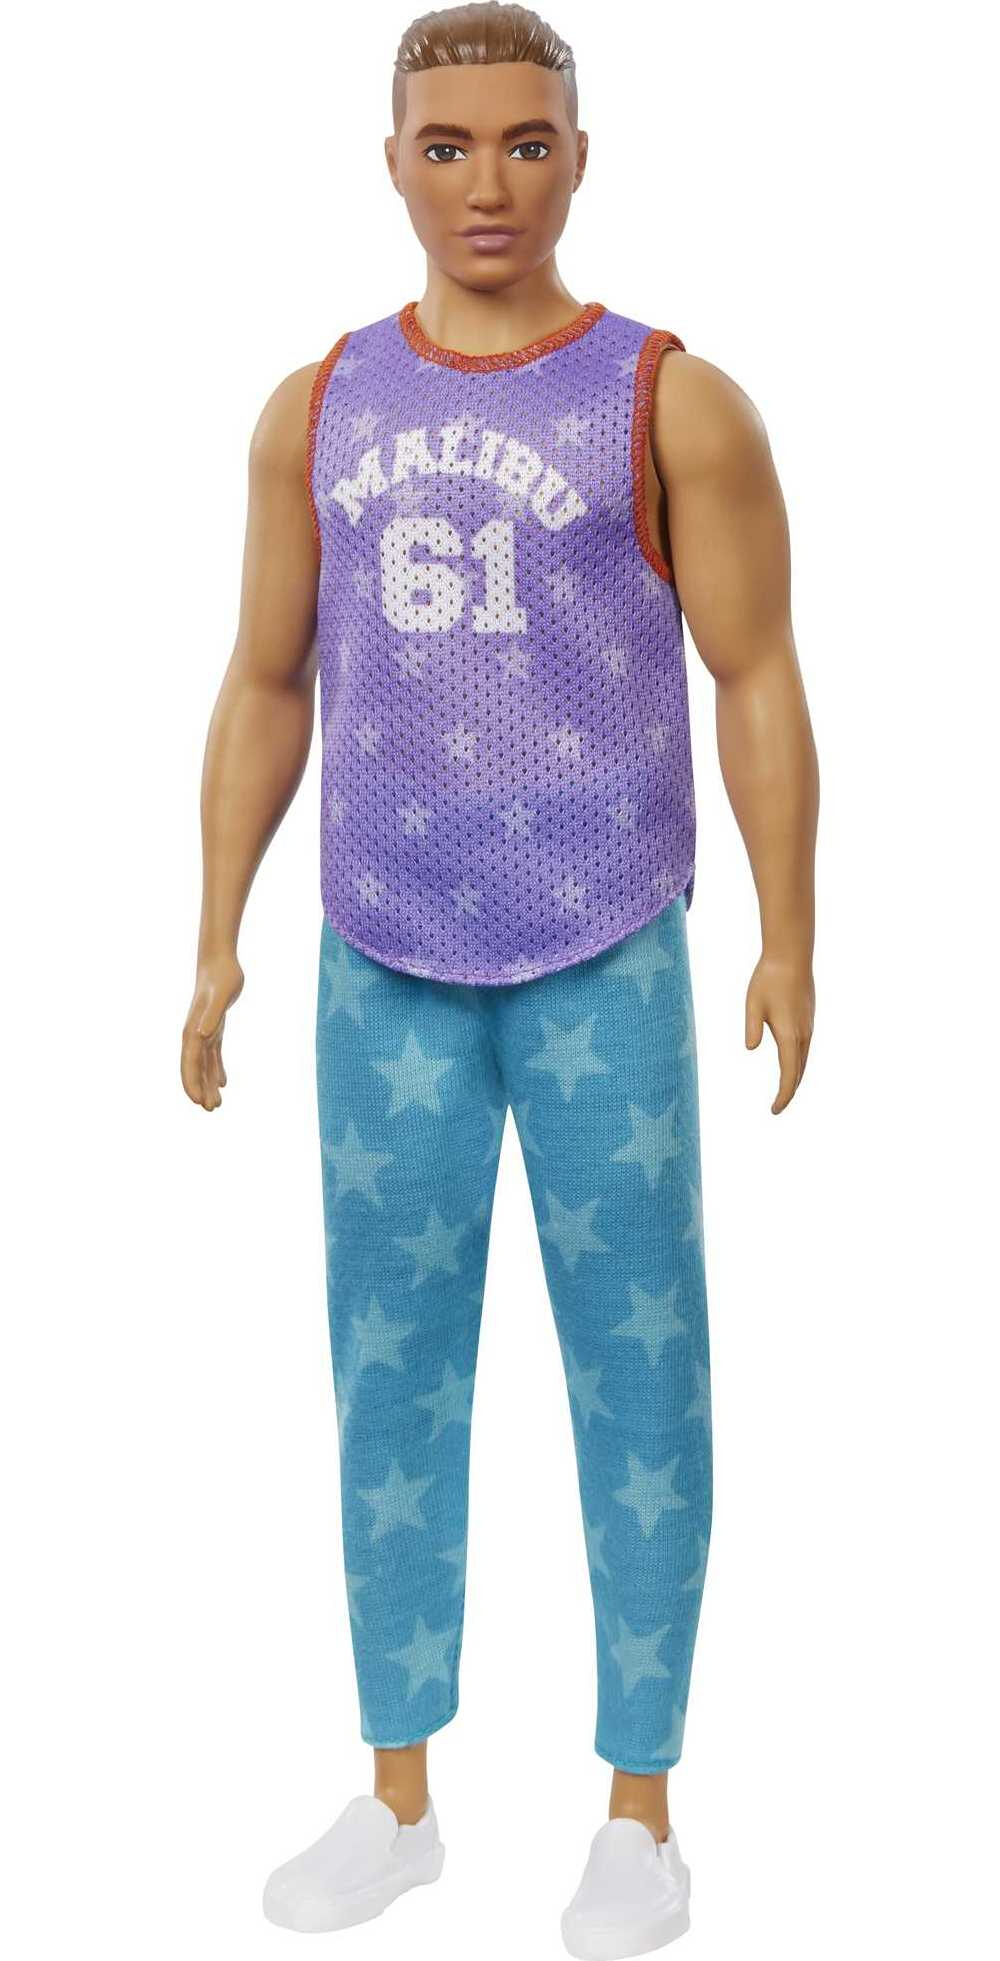 Barbie Ken Fashionistas Doll #165 with Sculpted Brown Hair & Athleisure-wear - image 1 of 7